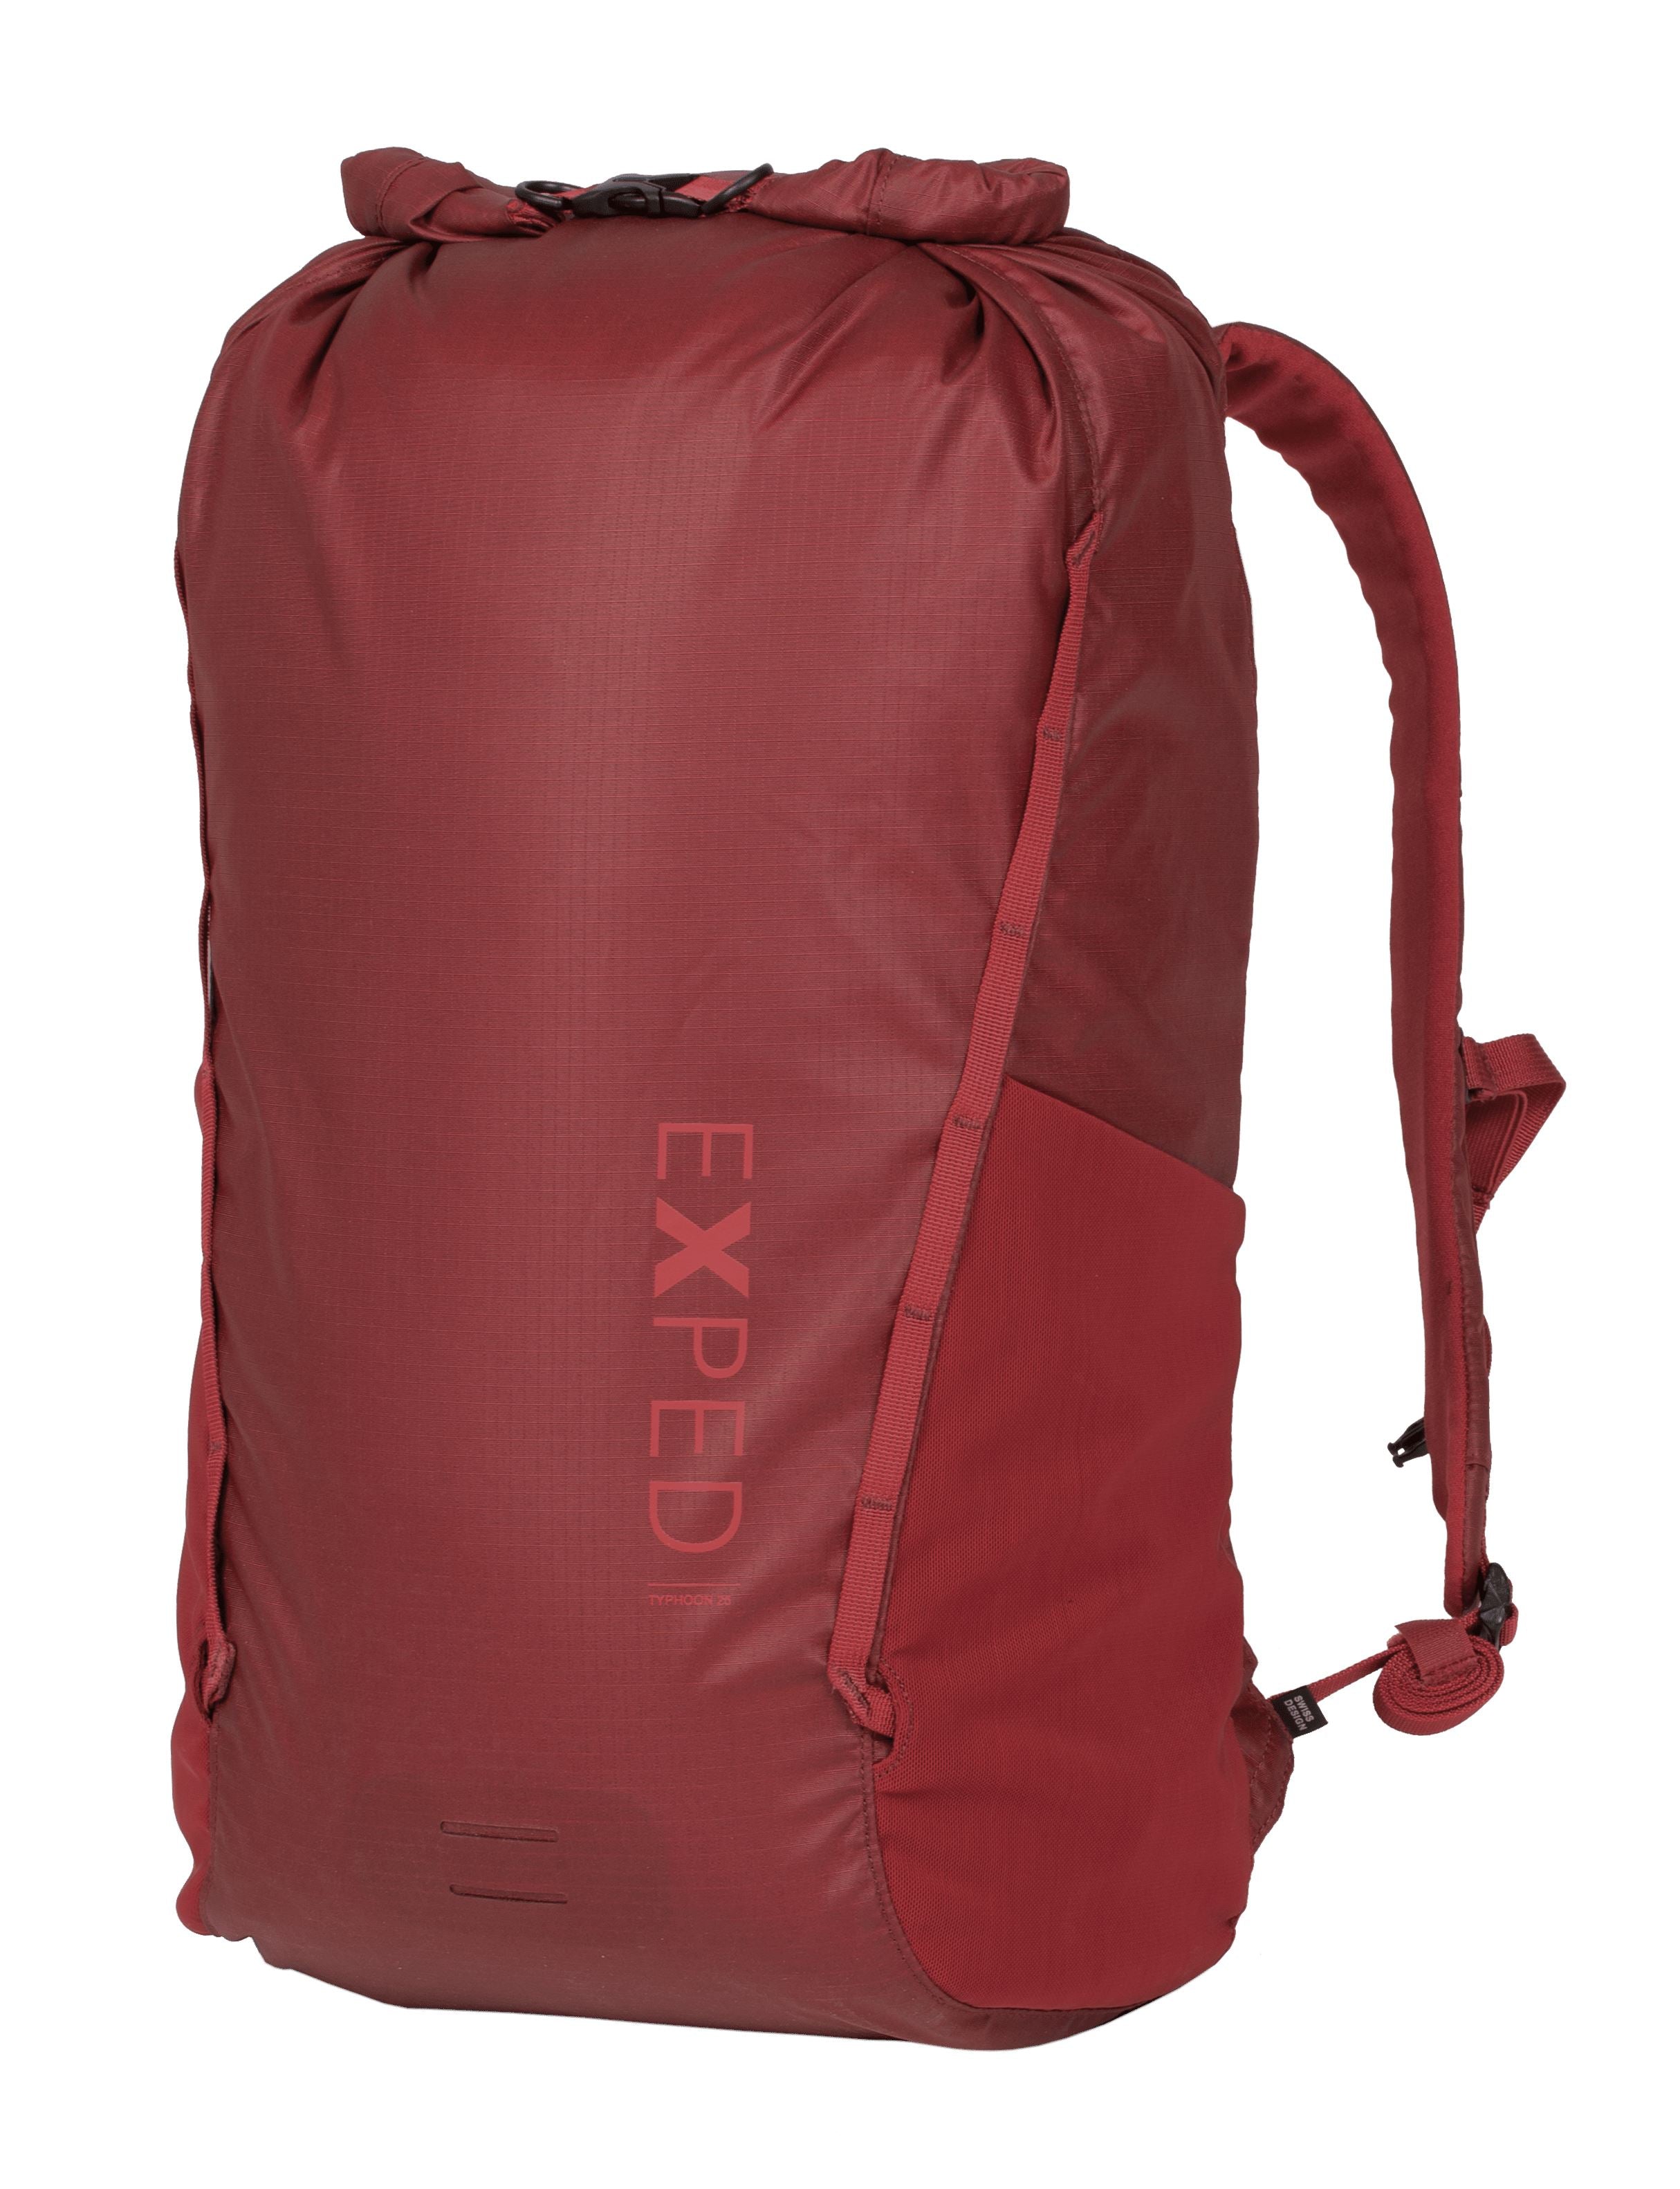 EXPED Typhoon 25 Backpack Burgundy 